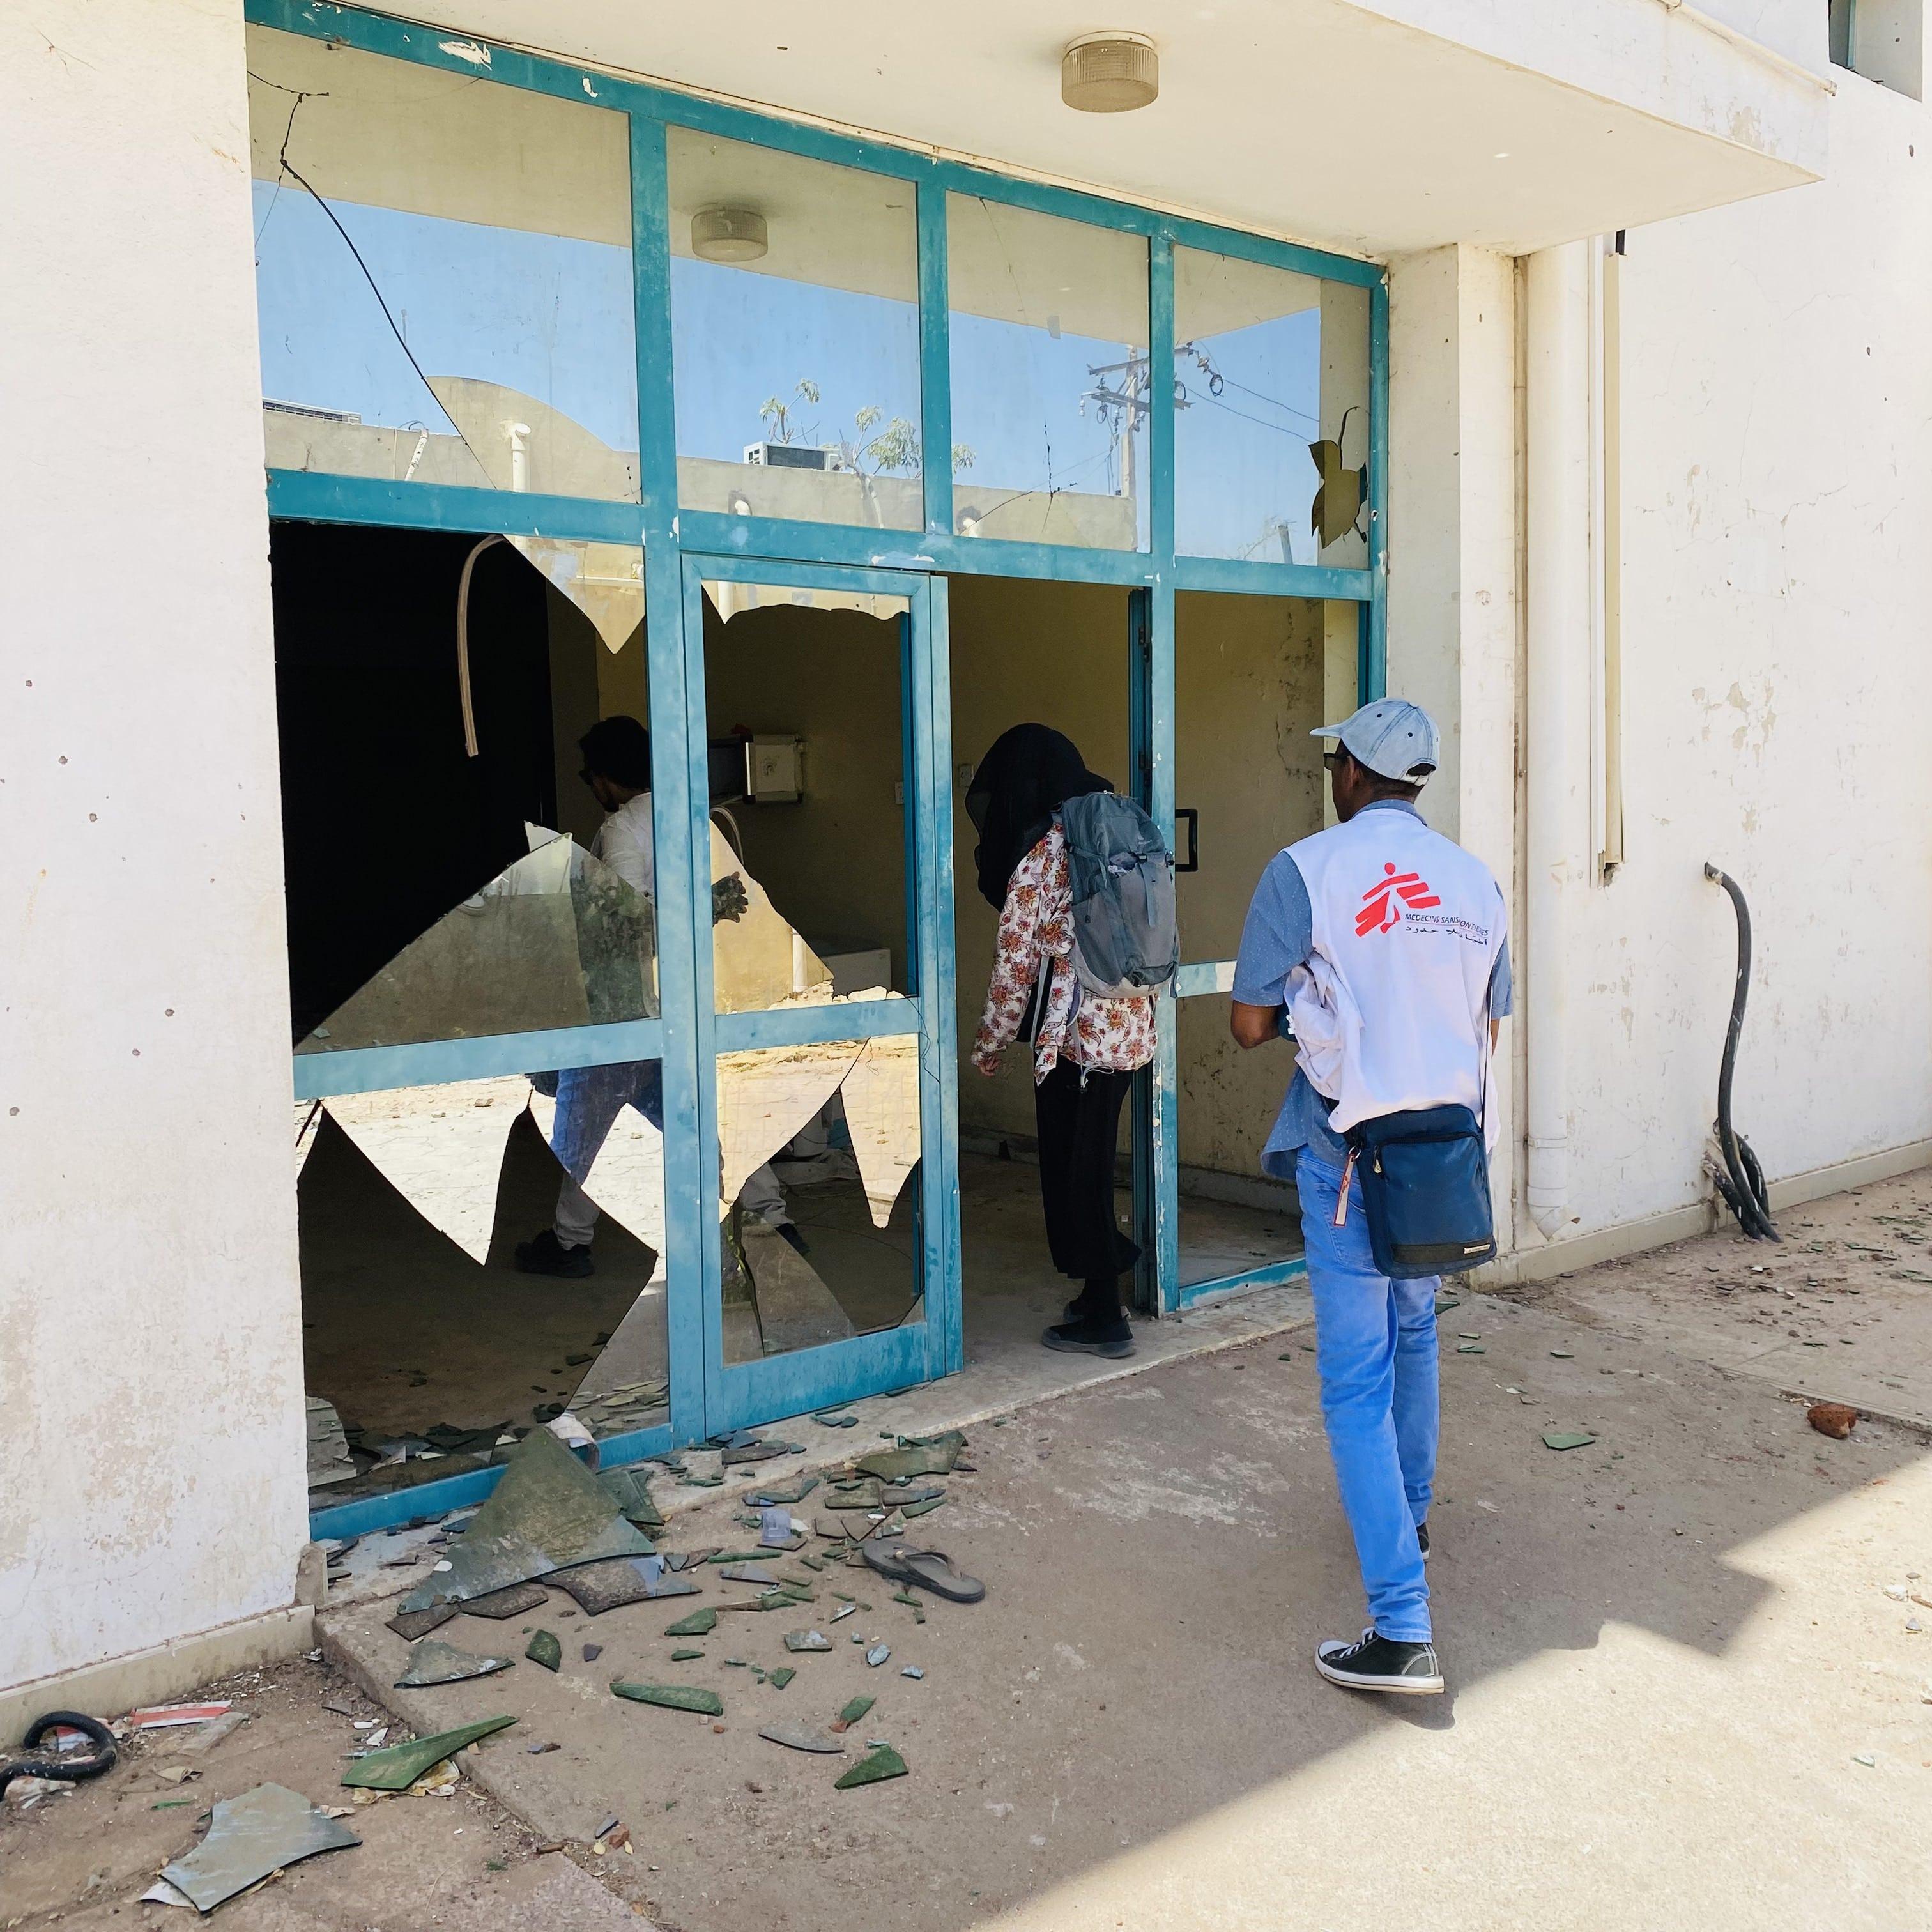 War in Sudan: MSF teams reassessing the damage at an MSF-supported health facility in Sudan, following a looting and storming incident.